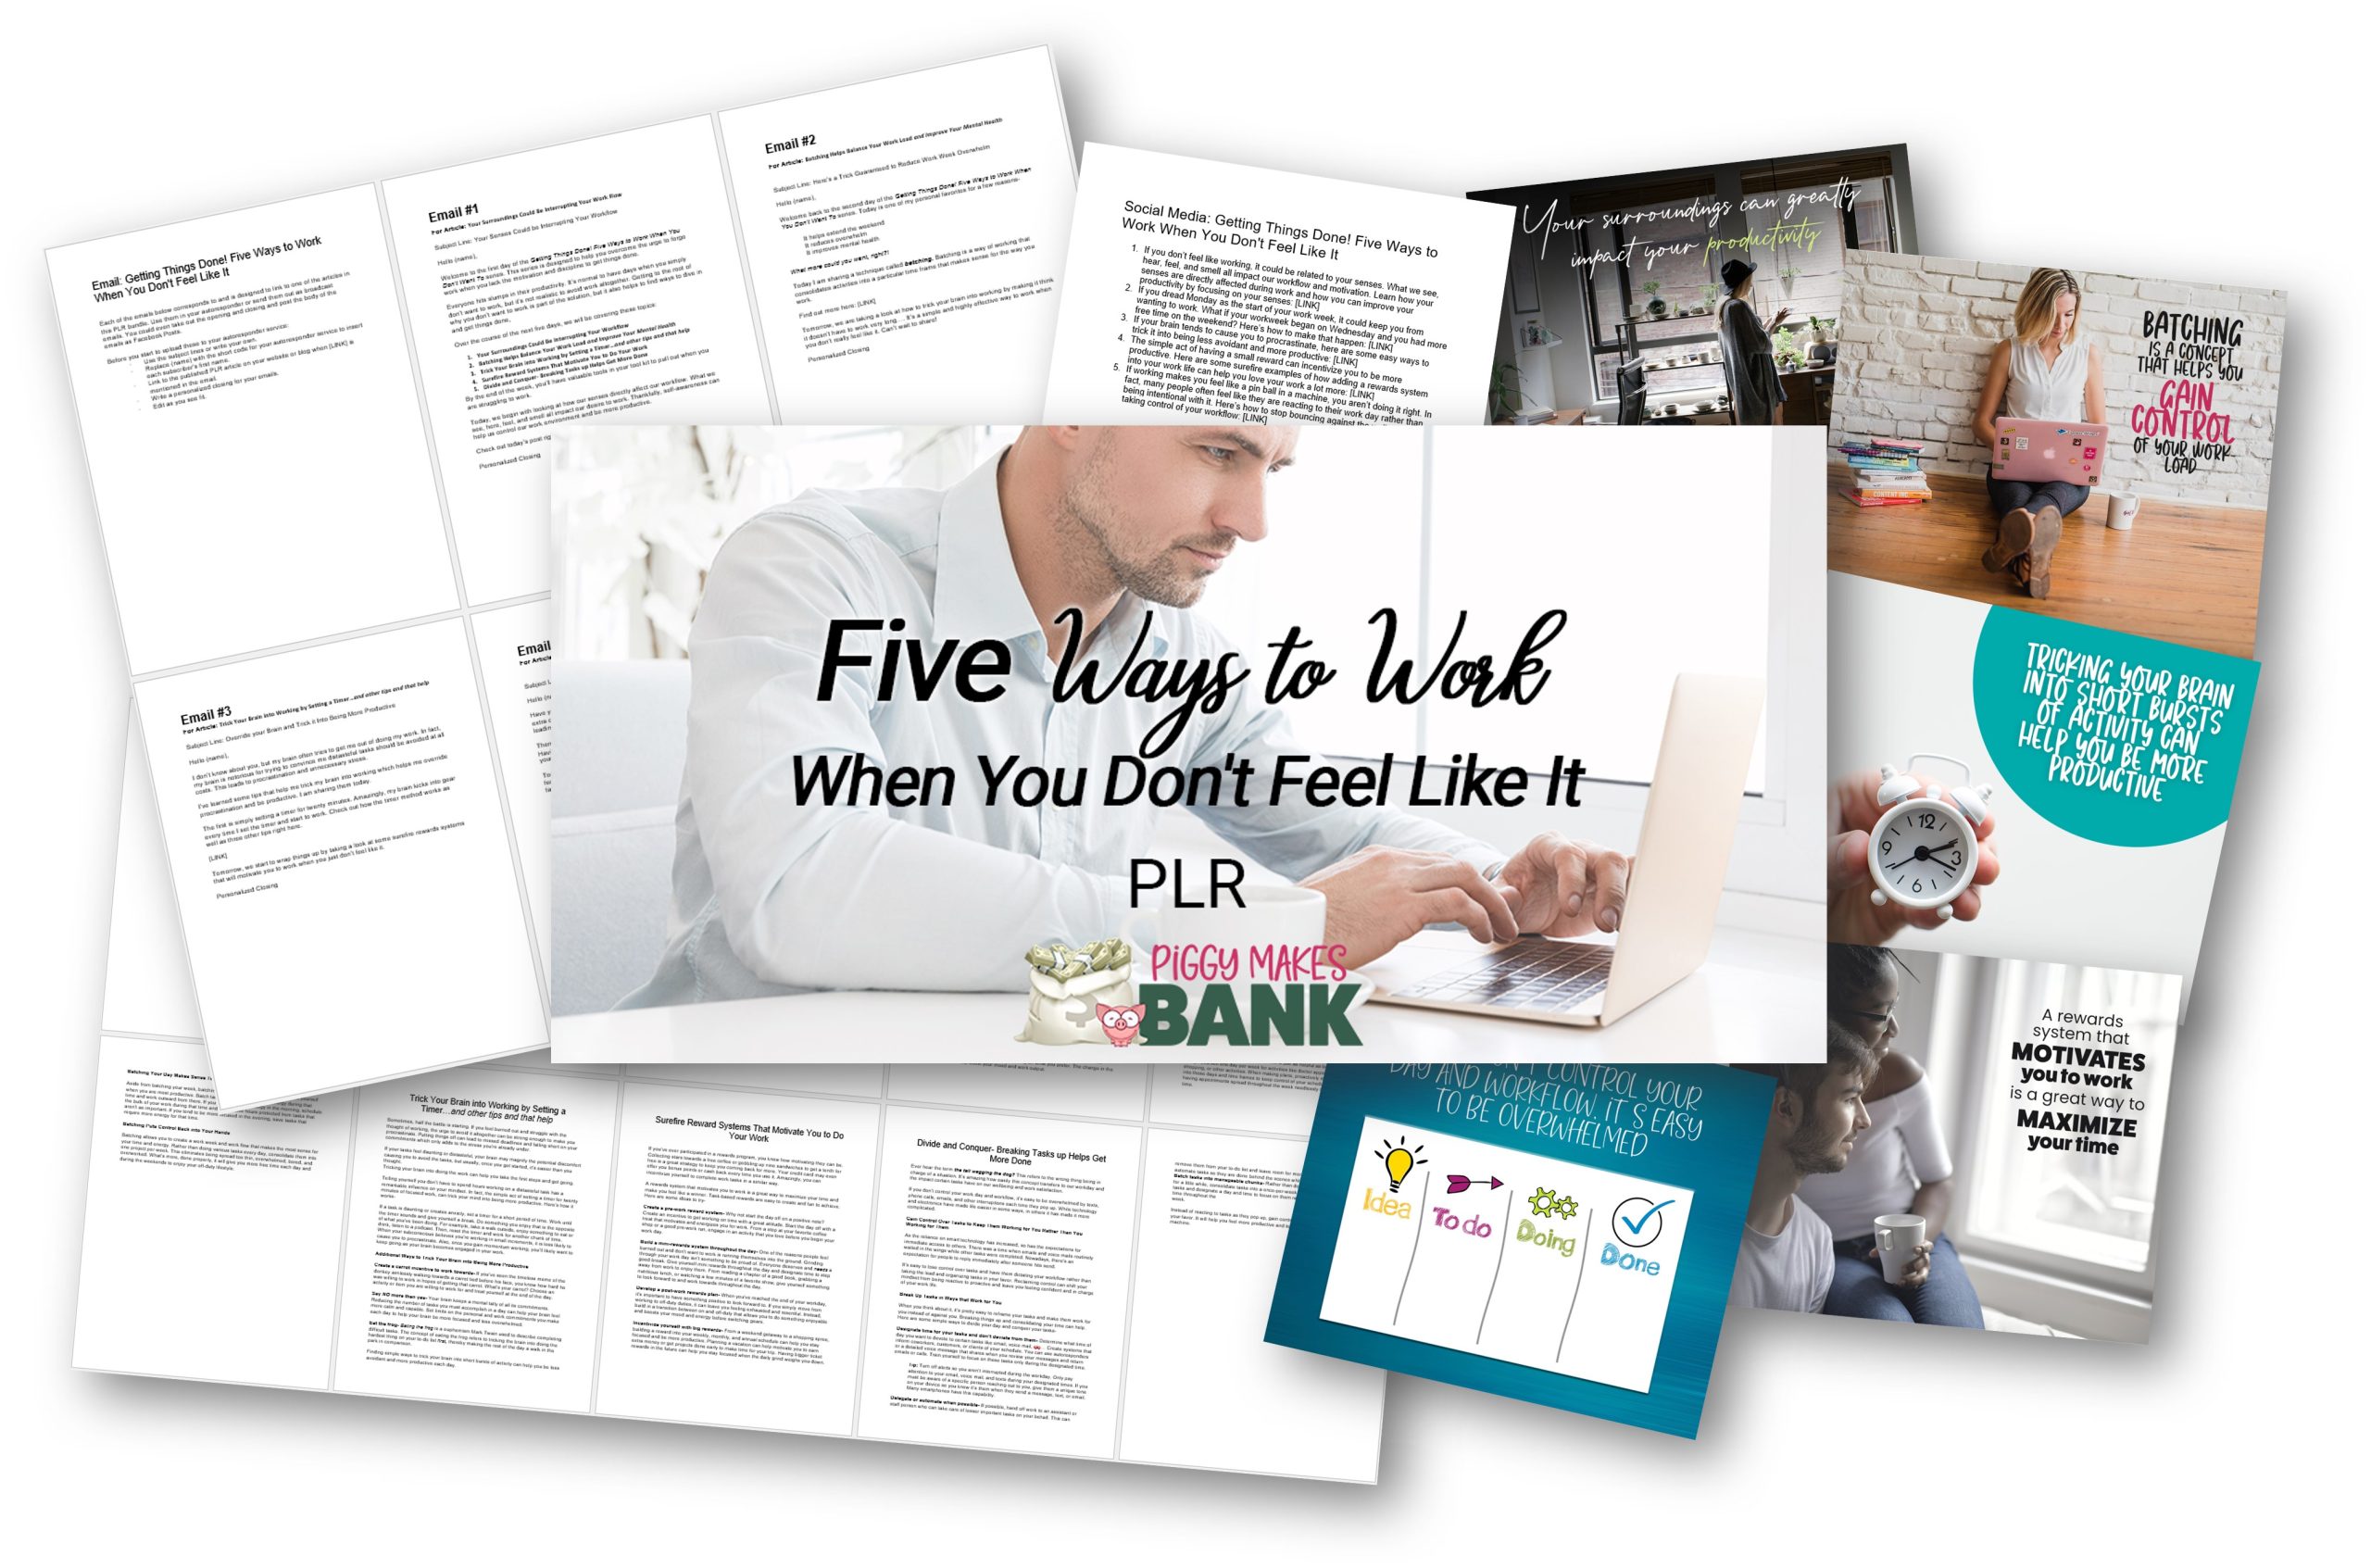 five ways to work when you don't feel like it PLR